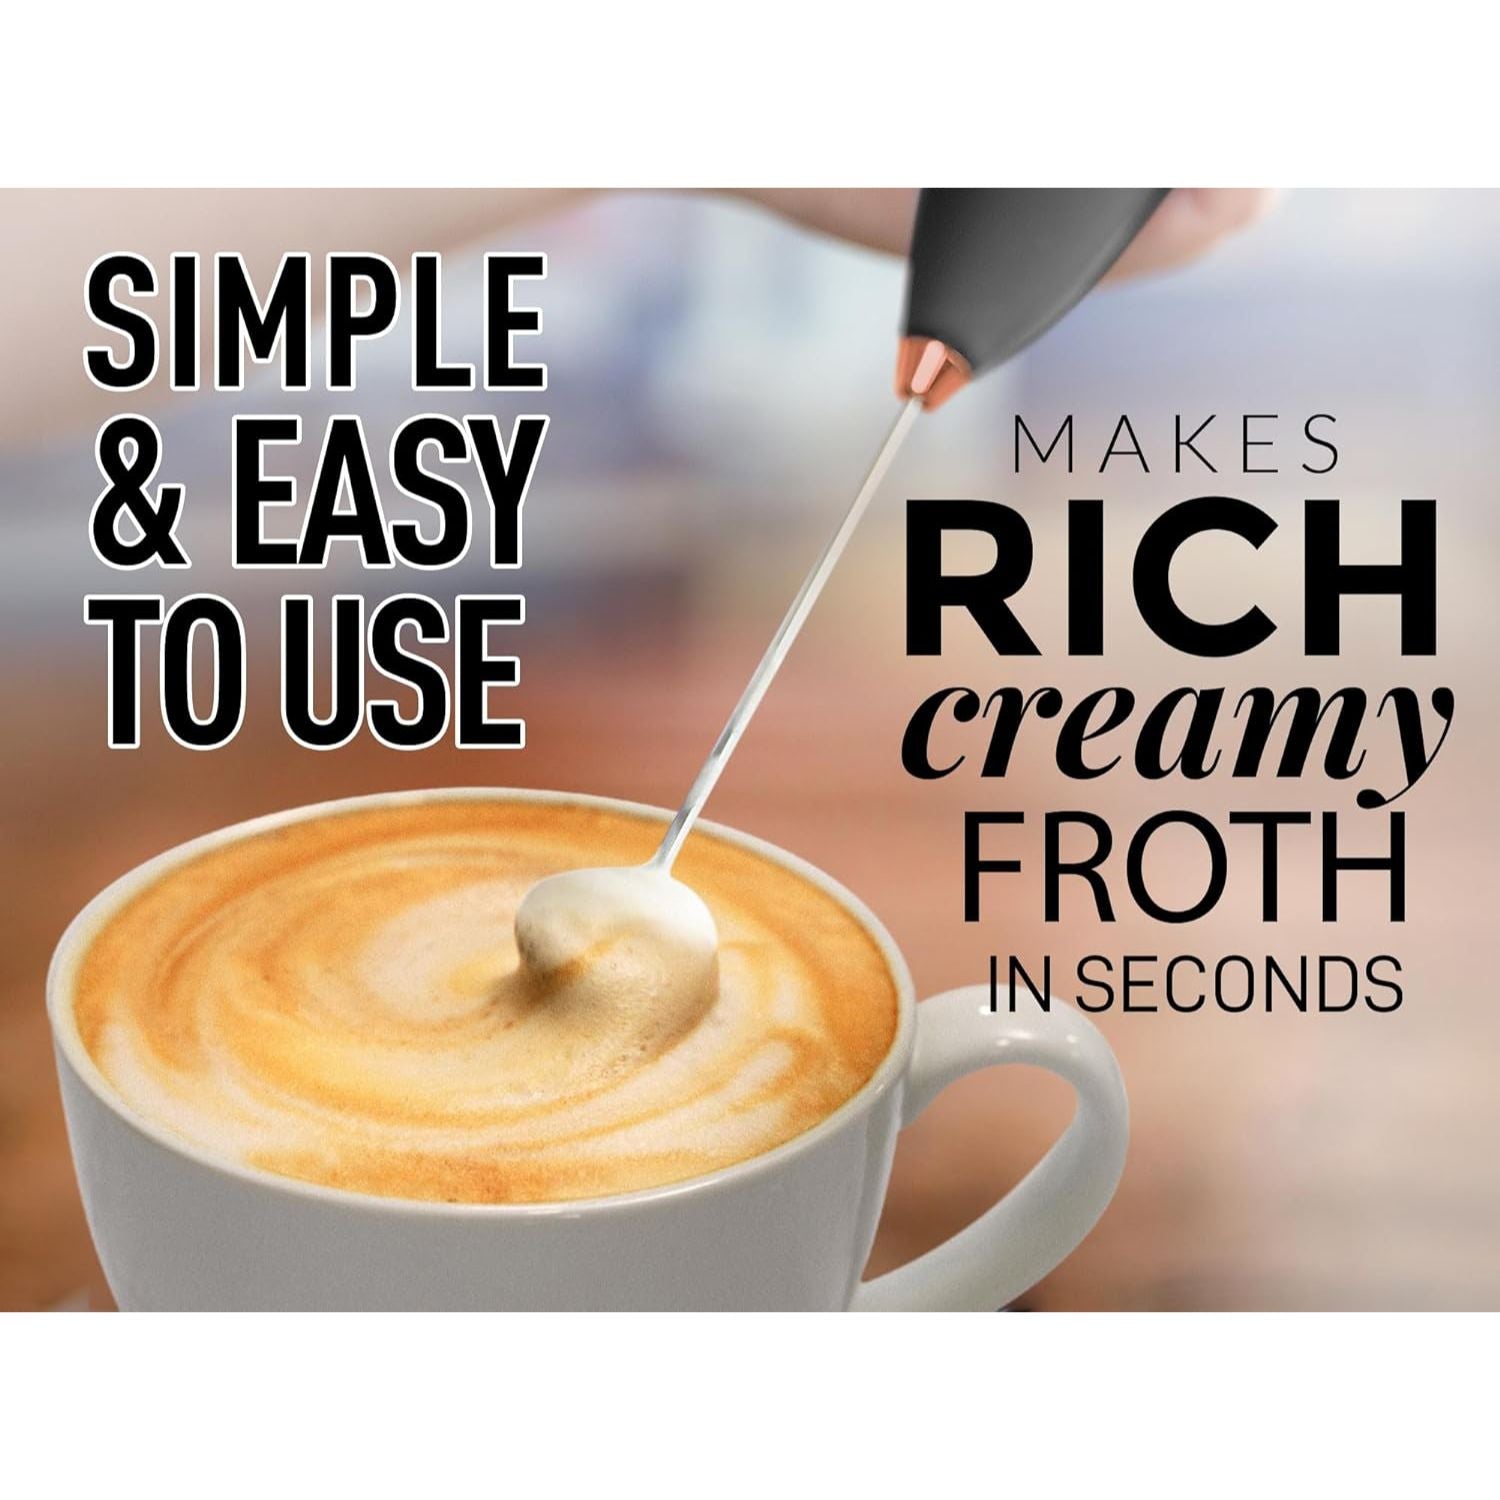 Executive Series Ultra Premium Gift Milk Frother for Coffee - White